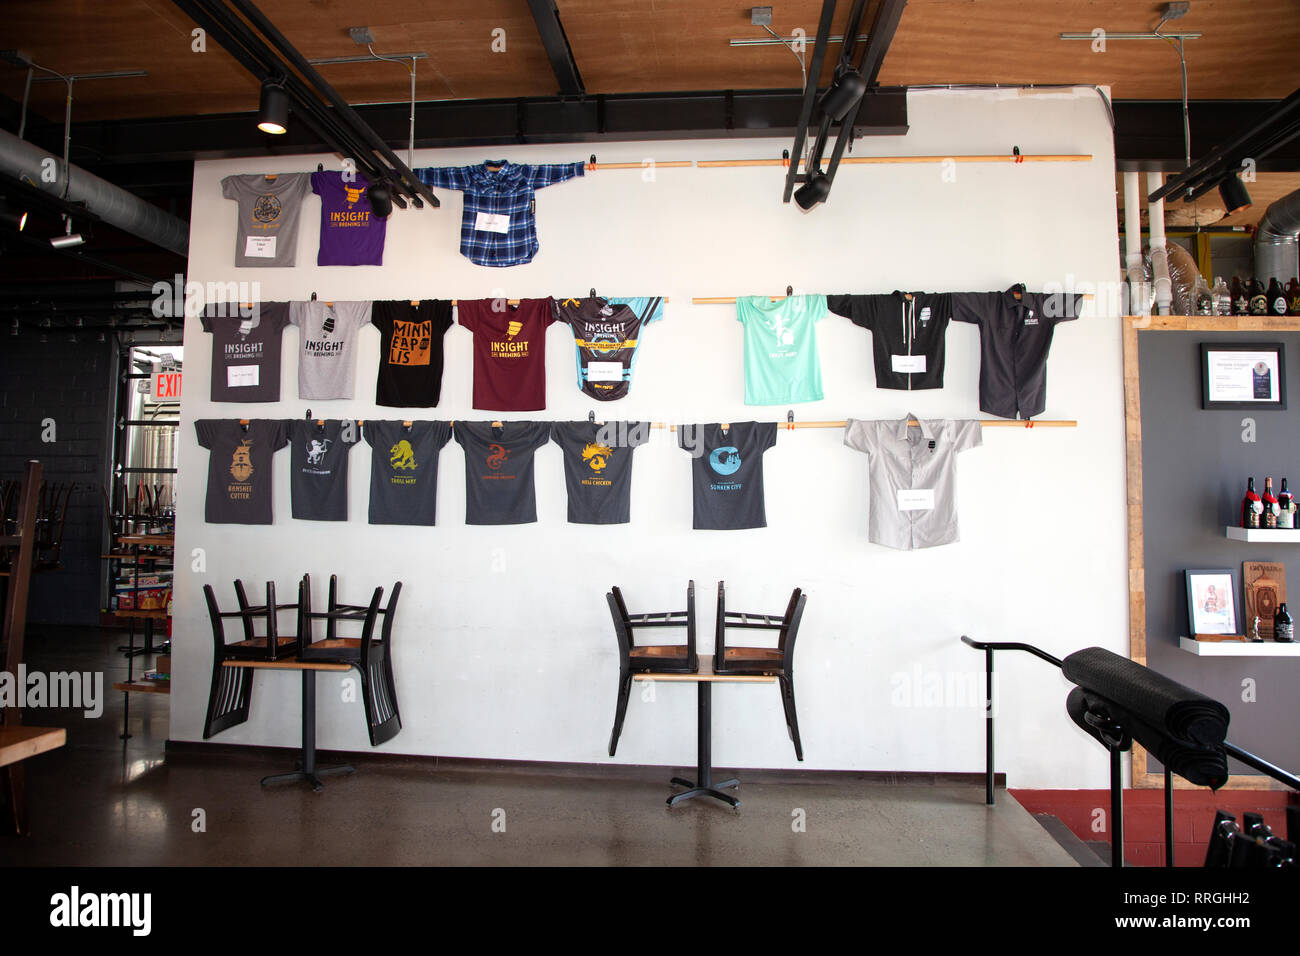 T-shirts with the company logo on display in The Insight Brewing taproom. Minneapolis Minnesota MN USA Stock Photo